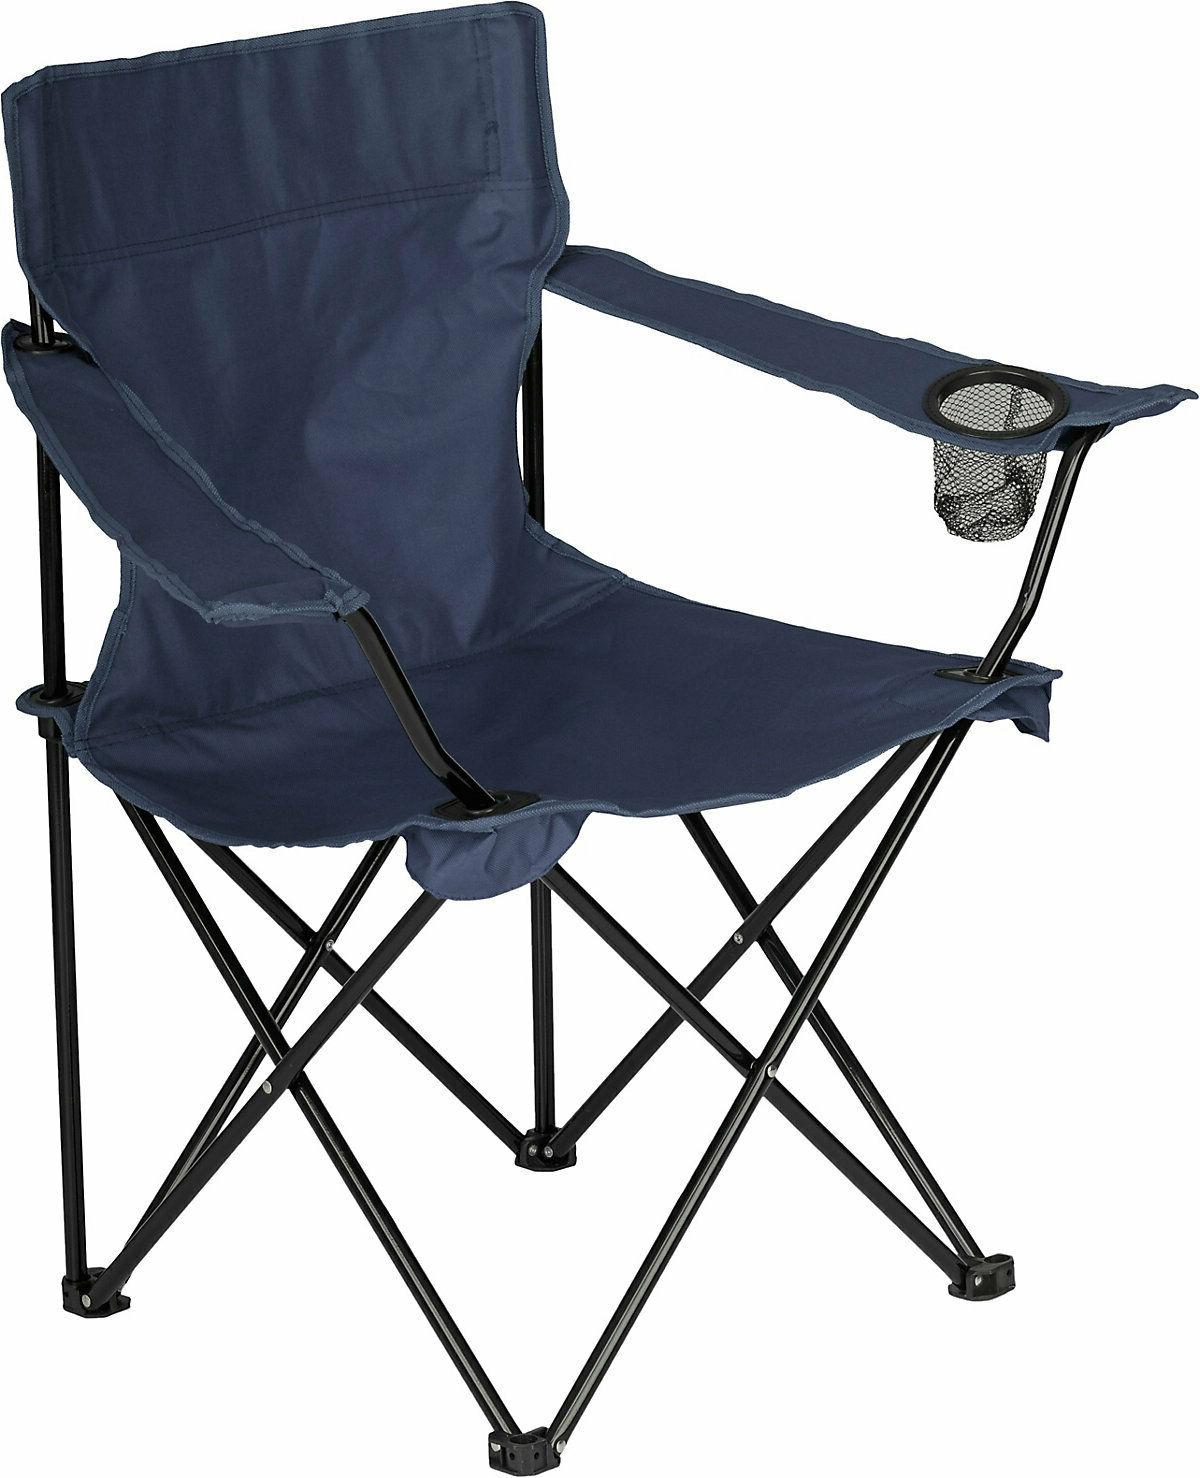 Folding Arm Chair With Umbrella Outdoor Stool V 3941786786 